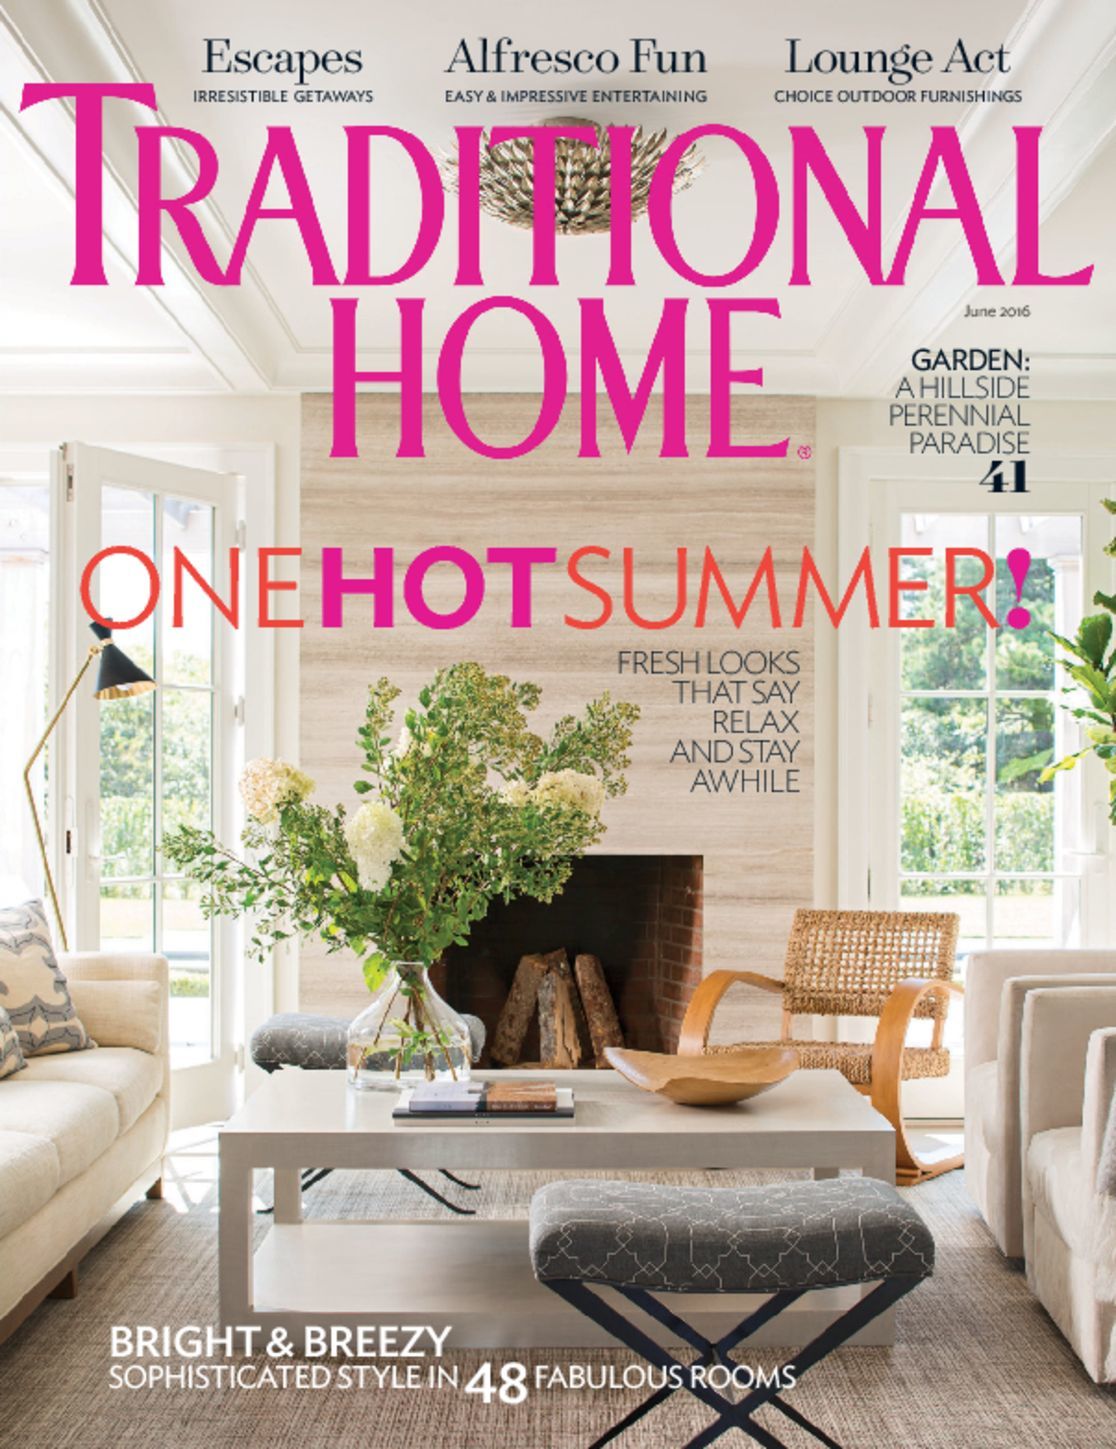 5349 Traditional Home Cover 2016 June 1 Issue 